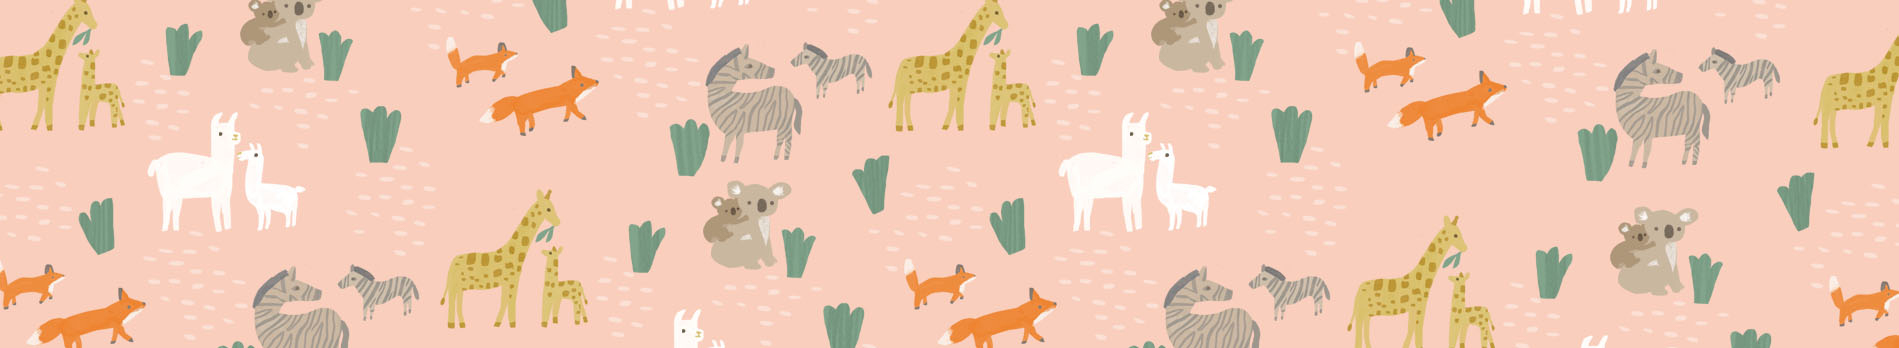 A repeated pattern of illustrated animals with their young, including zebras, giraffes, koalas, and llamas.